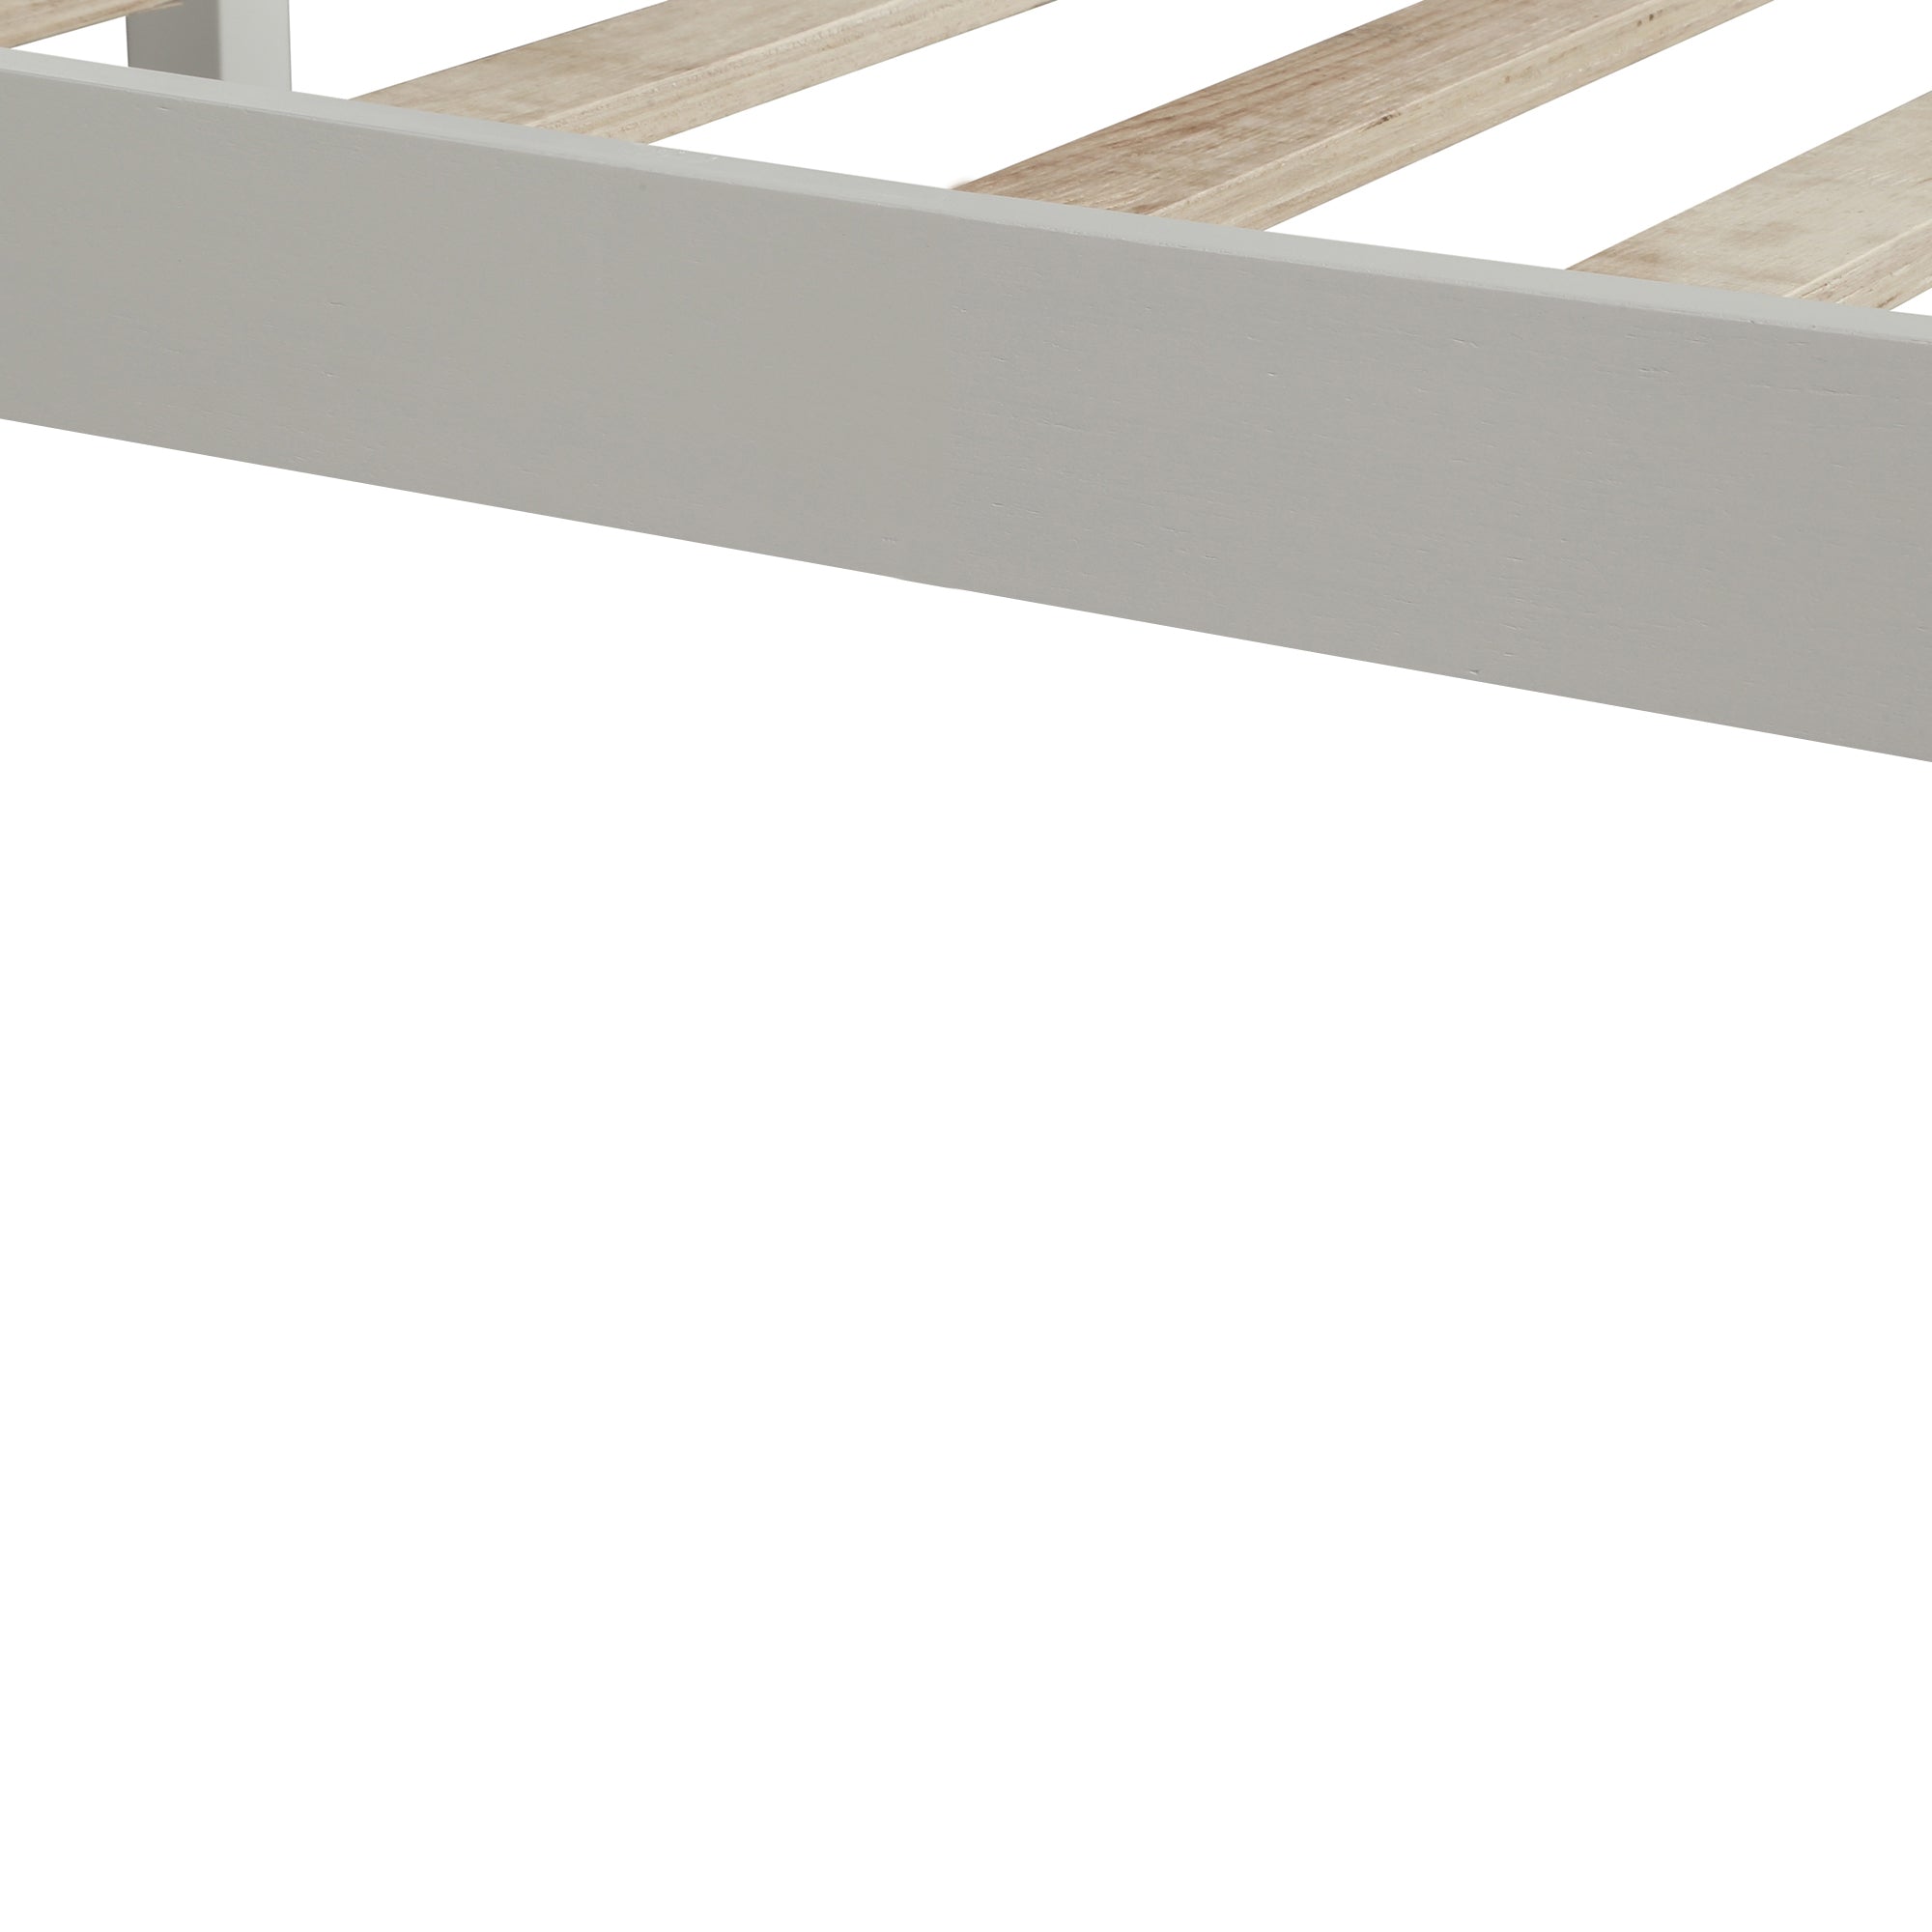 Full Platform Bed Frame with Headboard | Wood Slat Support | No Box Spring Needed | White Finish